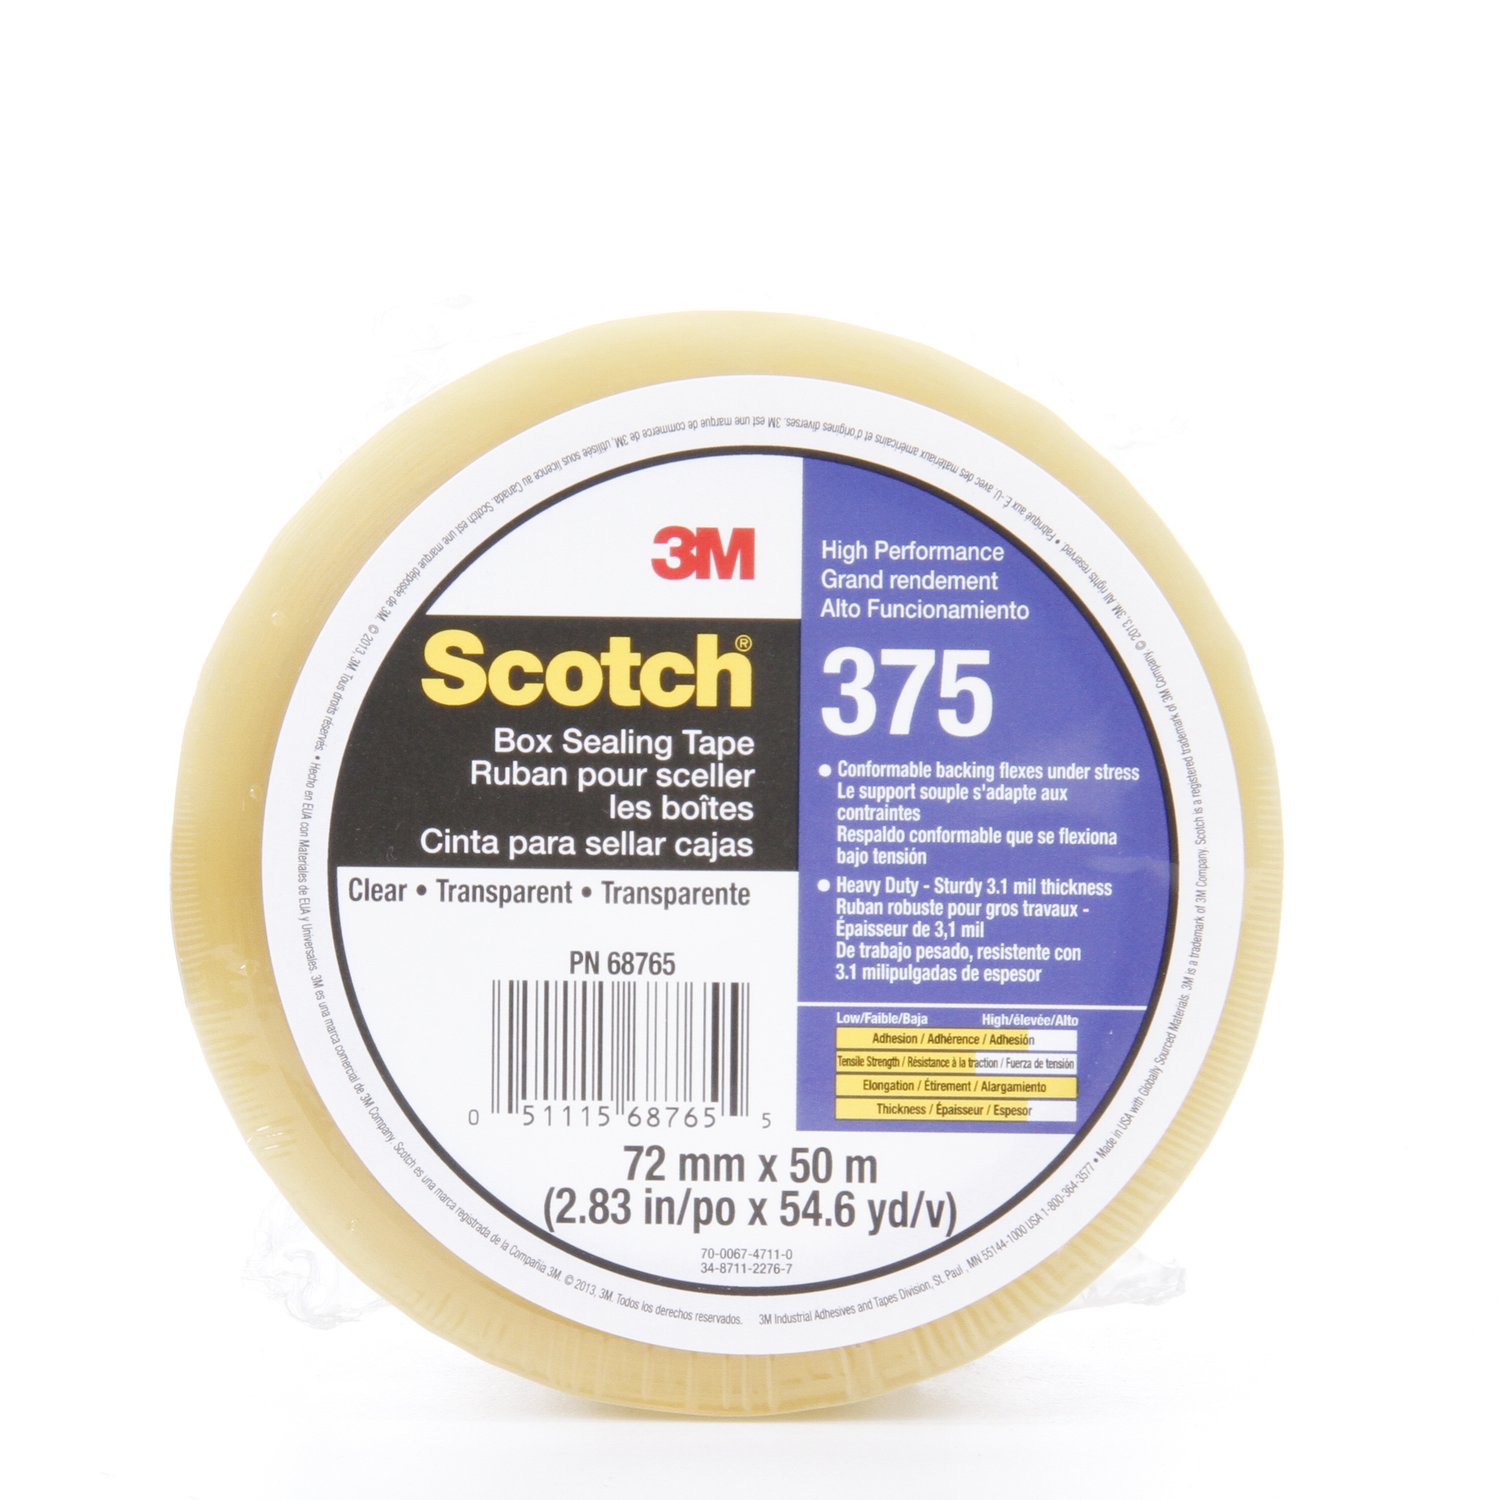 7010374961 - Scotch Box Sealing Tape 375, Clear, 72 mm x 50 m, 24/Case, Individually
Wrapped Conveniently Packaged